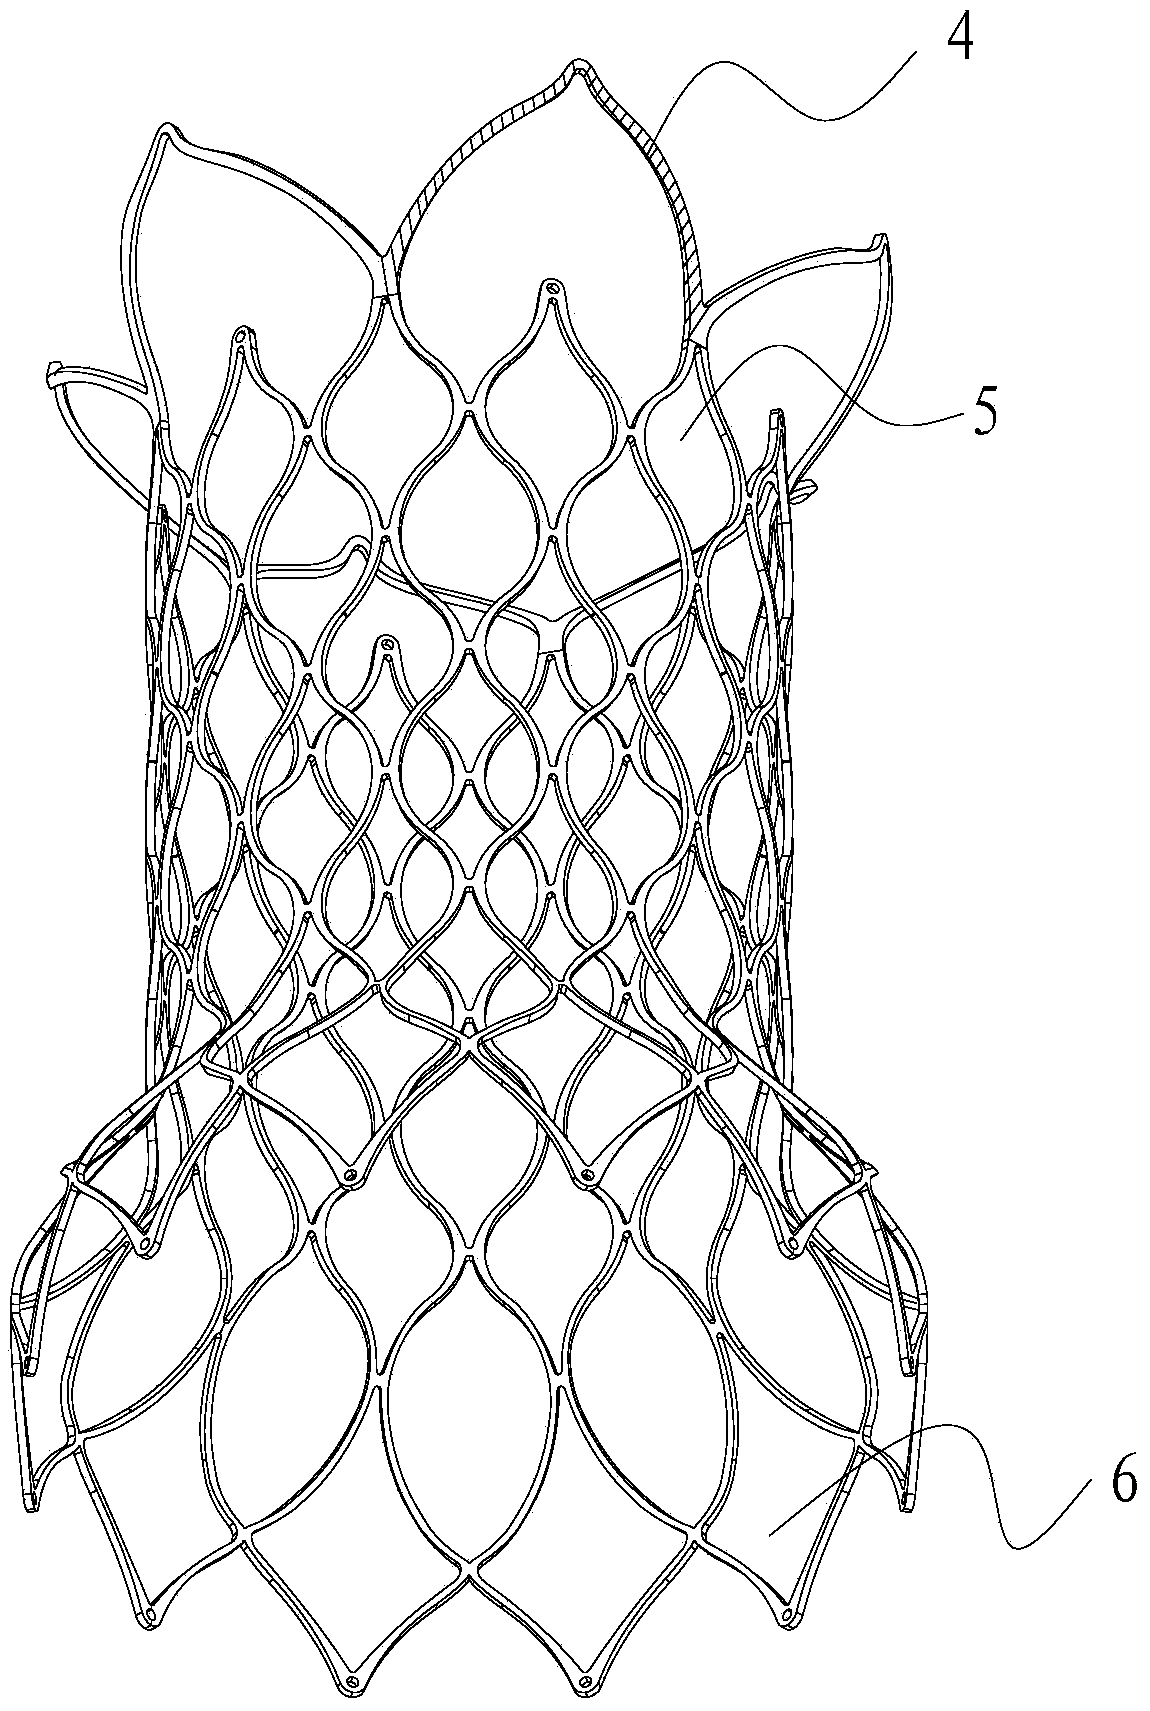 Pulmonary artery support and pulmonary artery valve replacement device with same